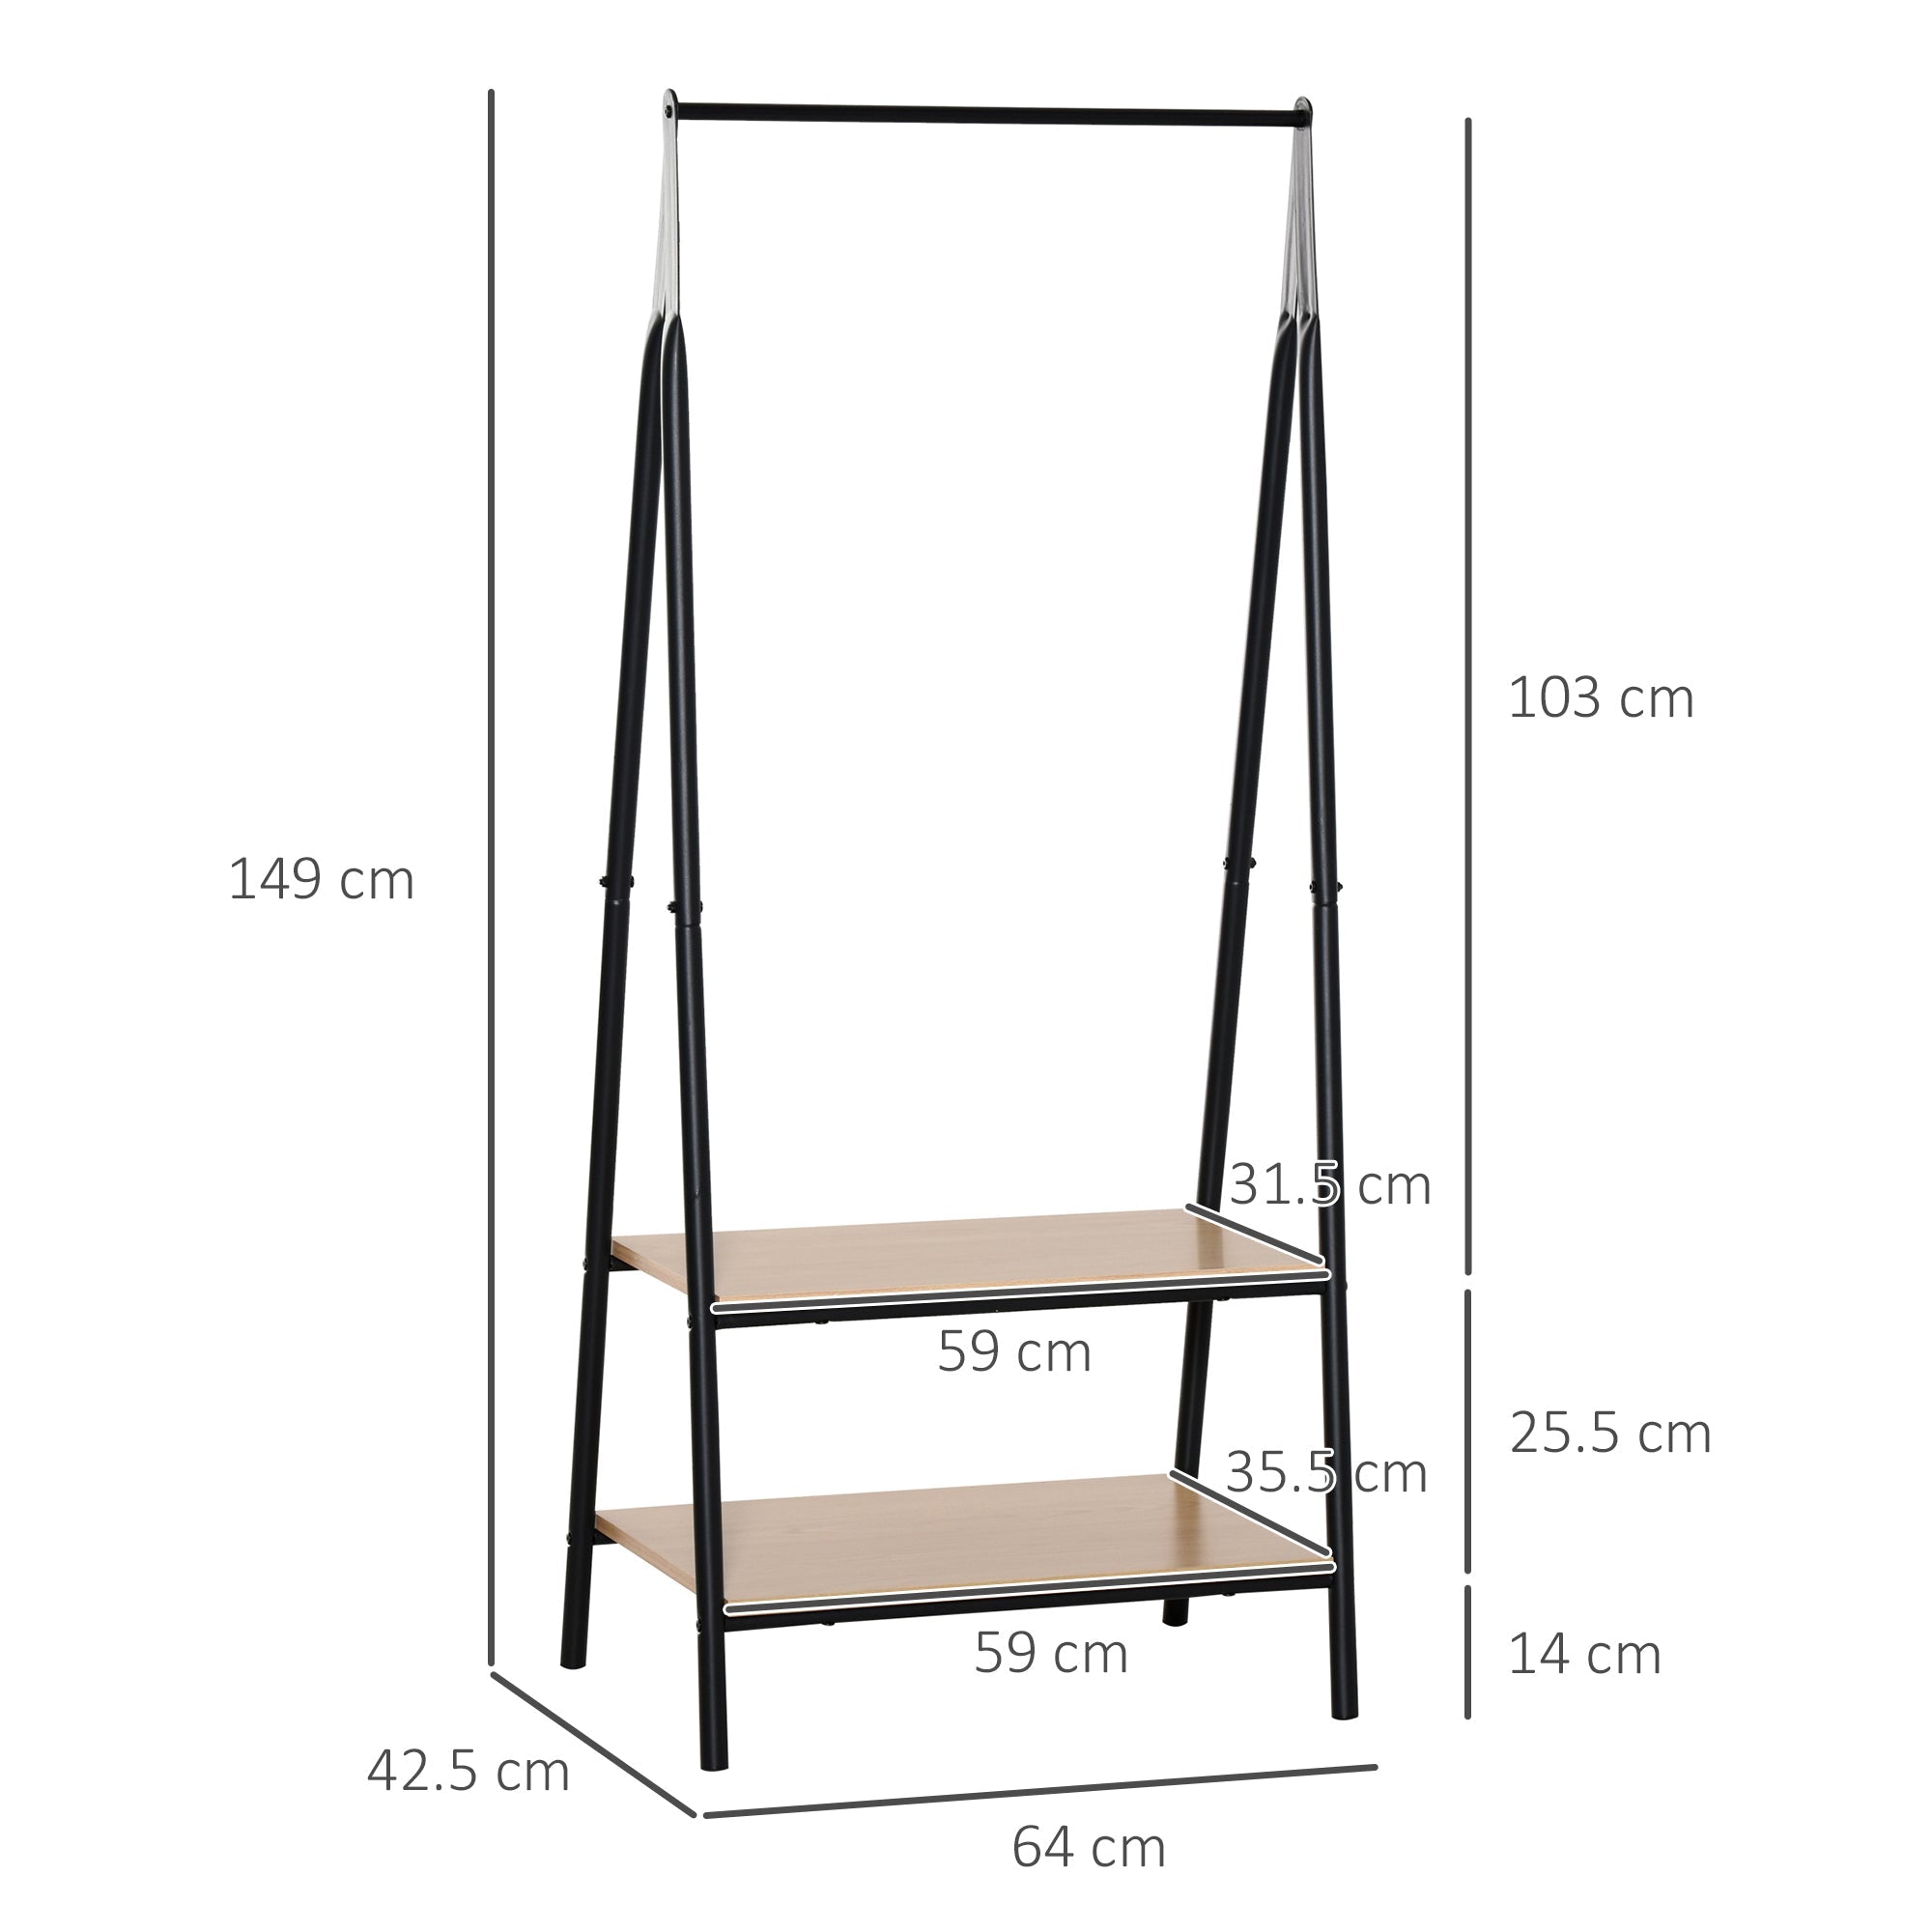 Clothes Rail, Freestanding Metal Clothes Rack with 2 Tier Storage Shelves for Bedroom and Entryway, 64 x 42.5 x 149 cm, Black Frame-2